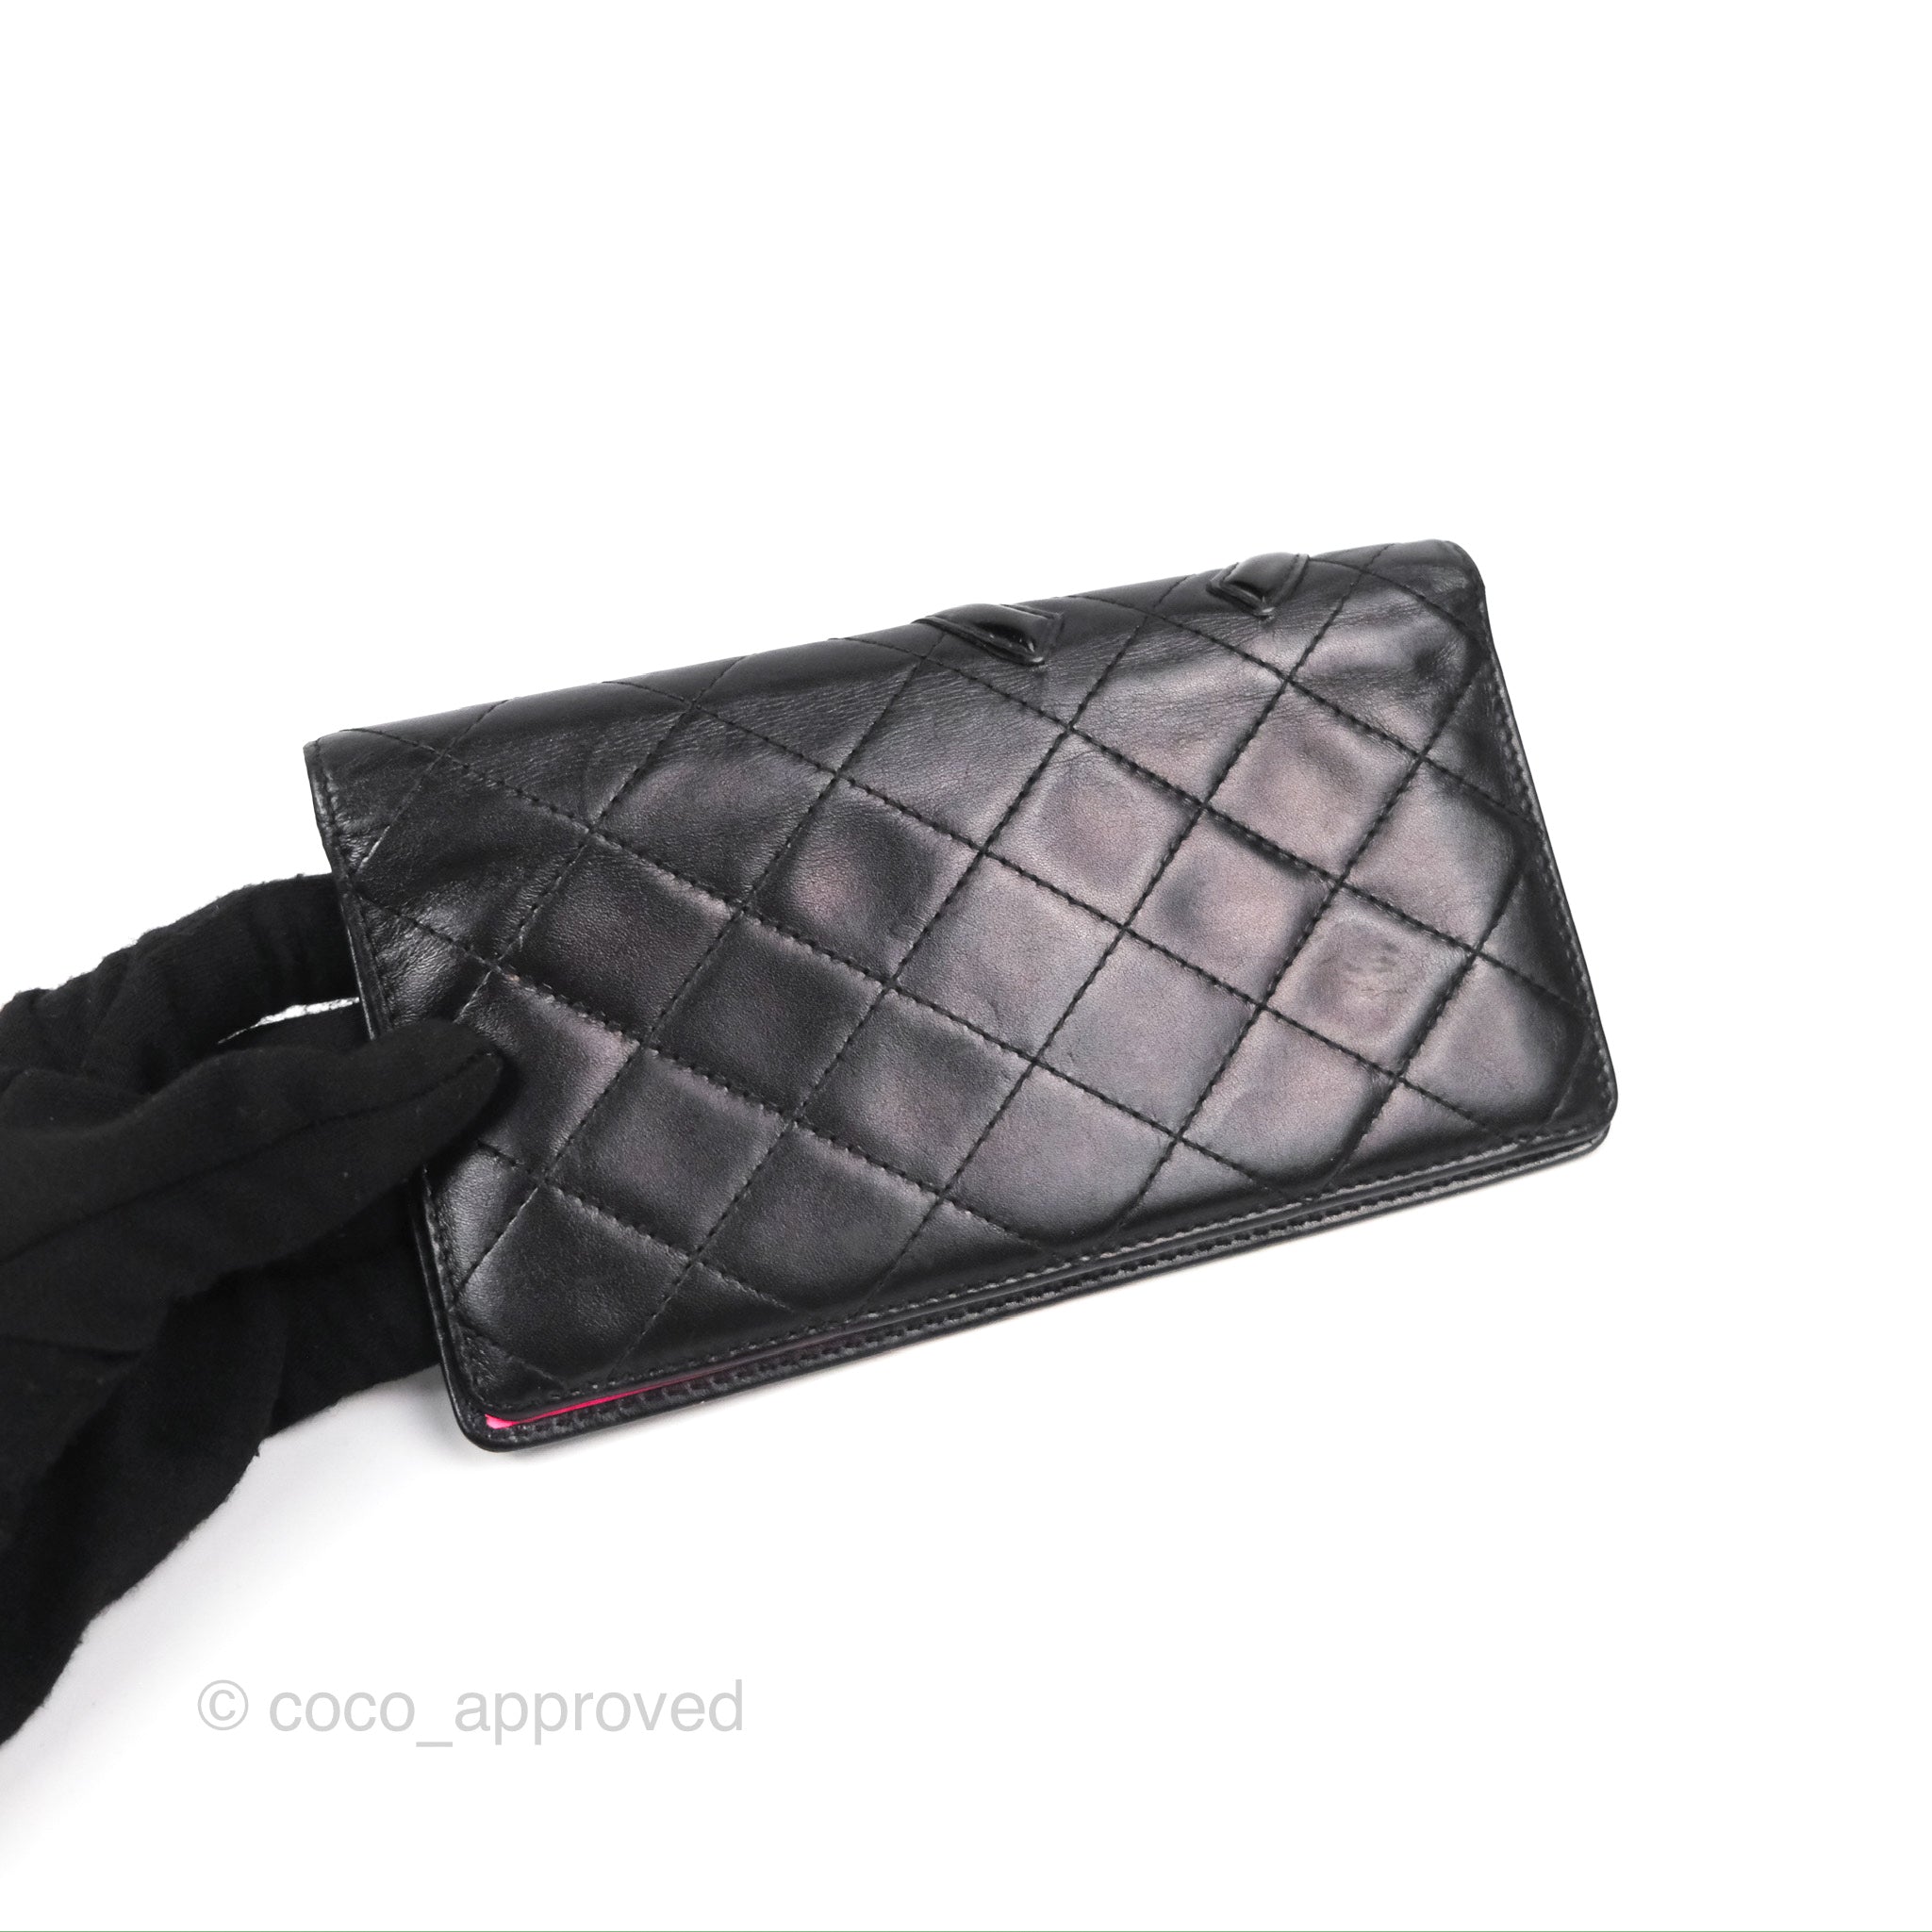 Sold at Auction: Chanel Caviar Clutch - CC Large White Leather Wallet Logo  O Case Folder Bag